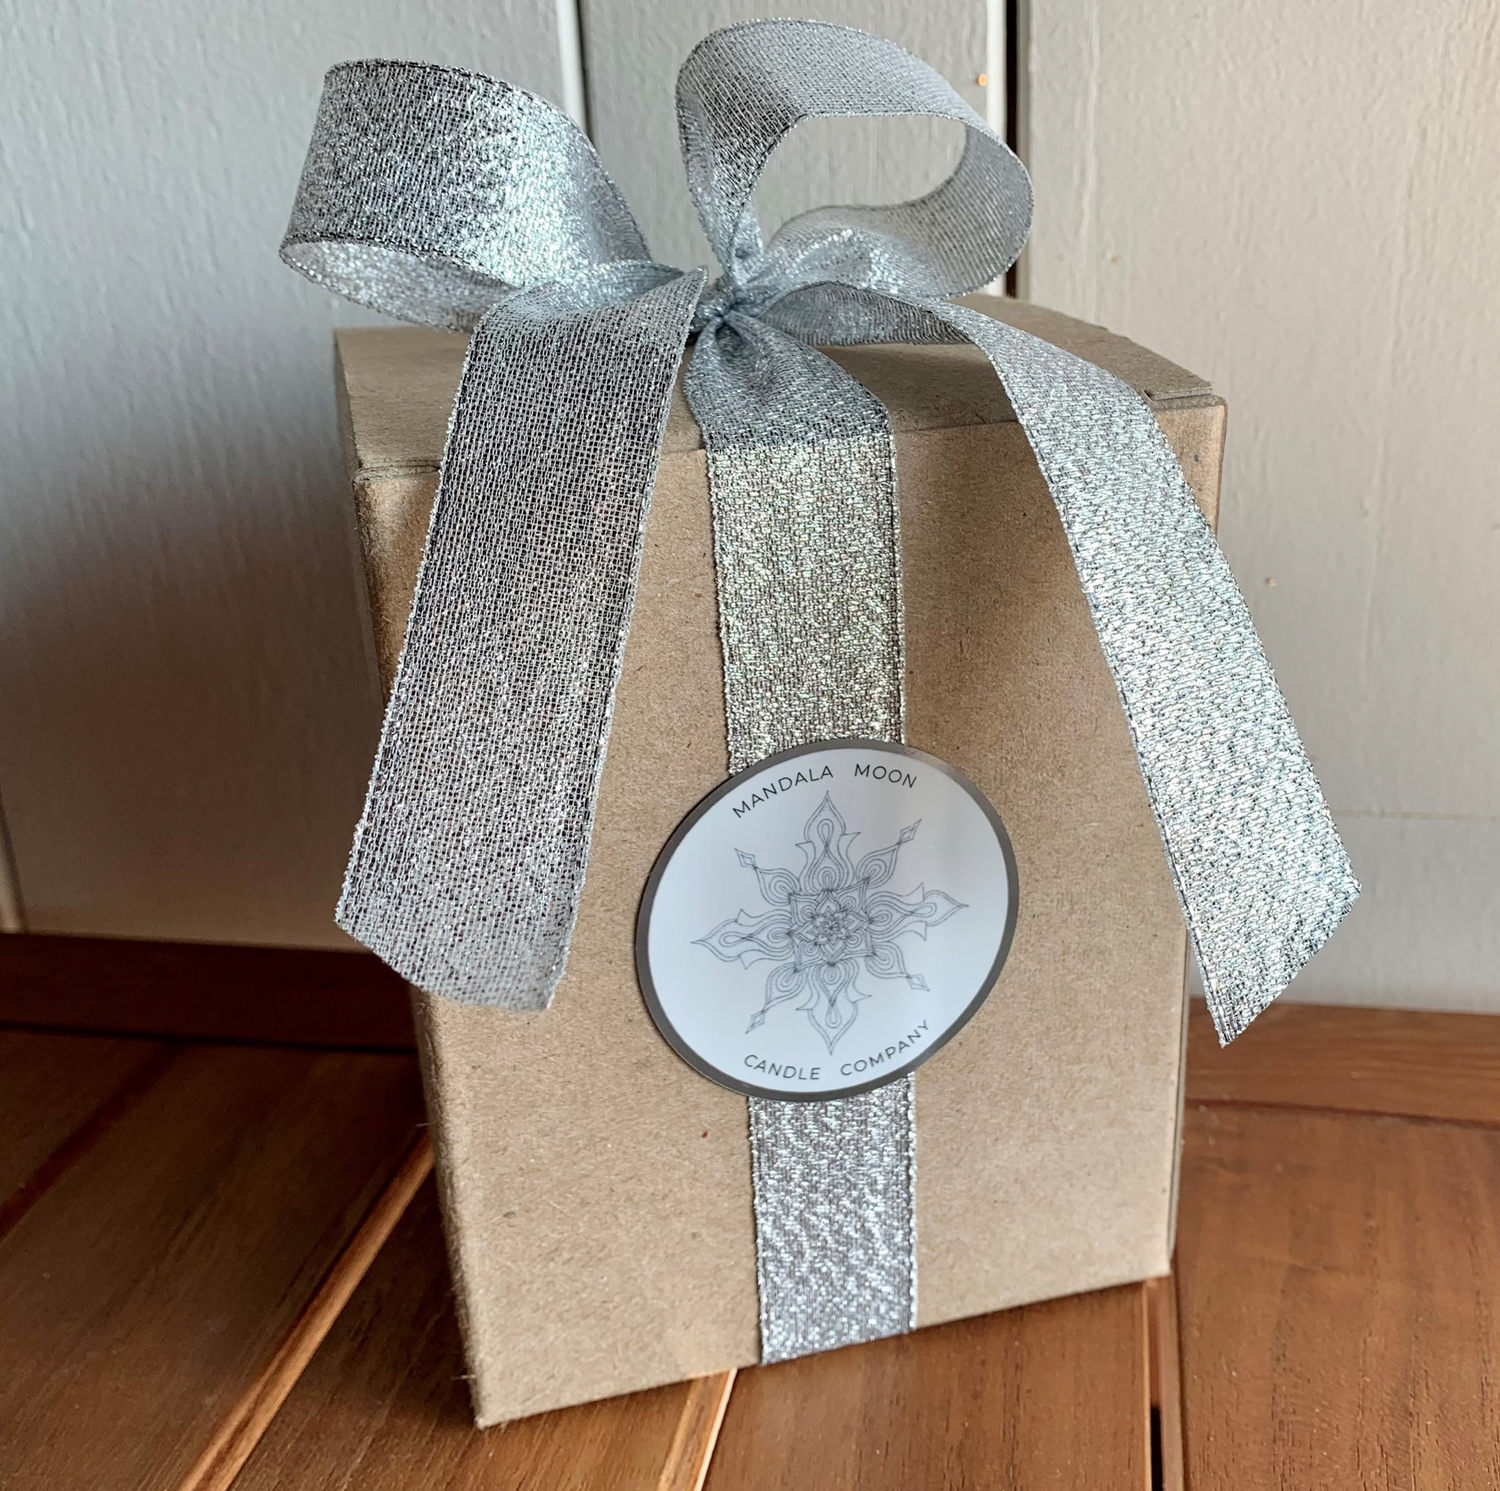 Hand Poured Soy Candle Glisten Candle gift wrapped